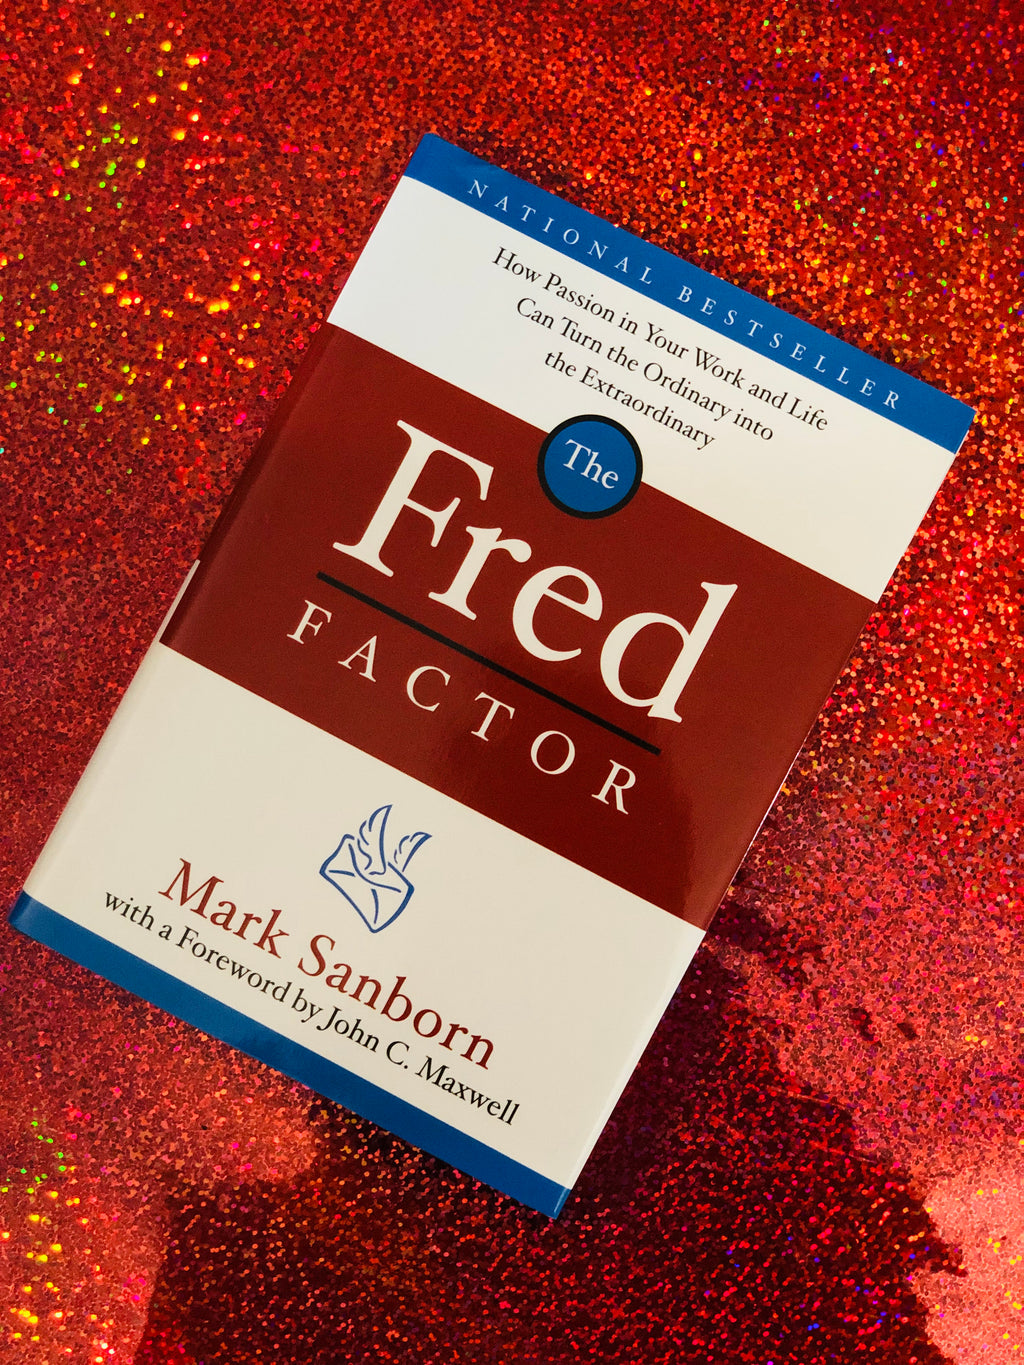 The Fred Factor- By Mark Sanborn